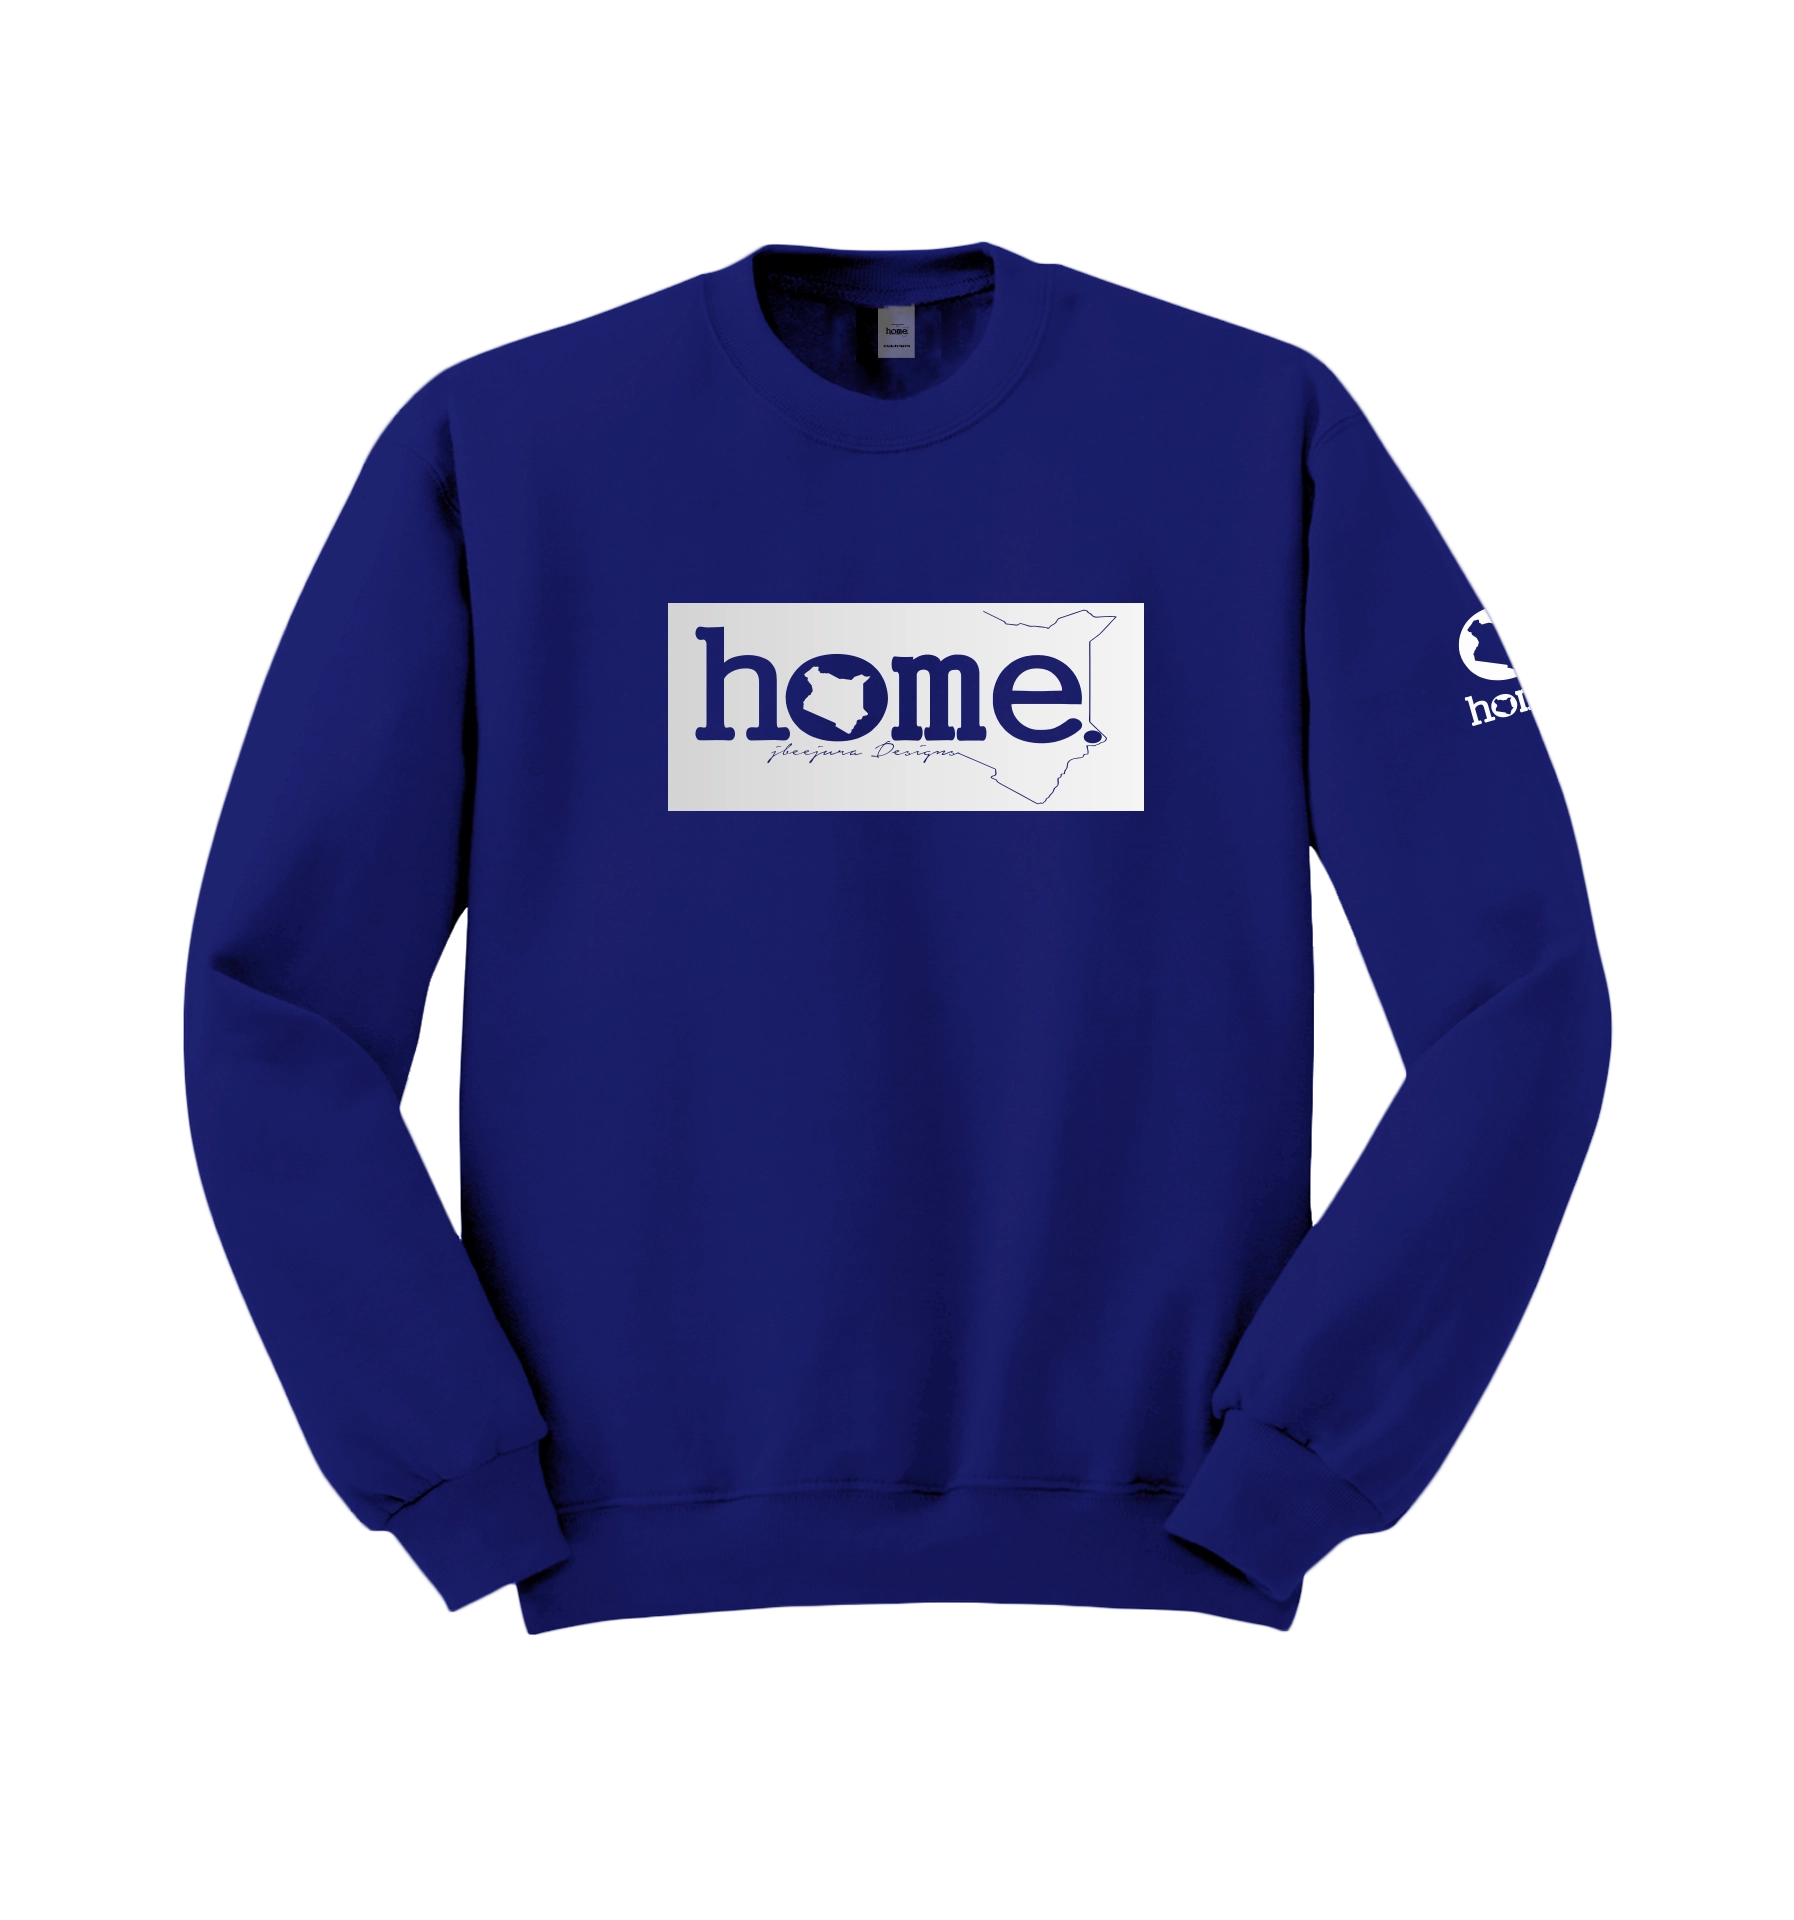 home_254 ROYAL BLUE SWEATSHIRT (HEAVY FABRIC) WITH A SILVER CLASSIC PRINT